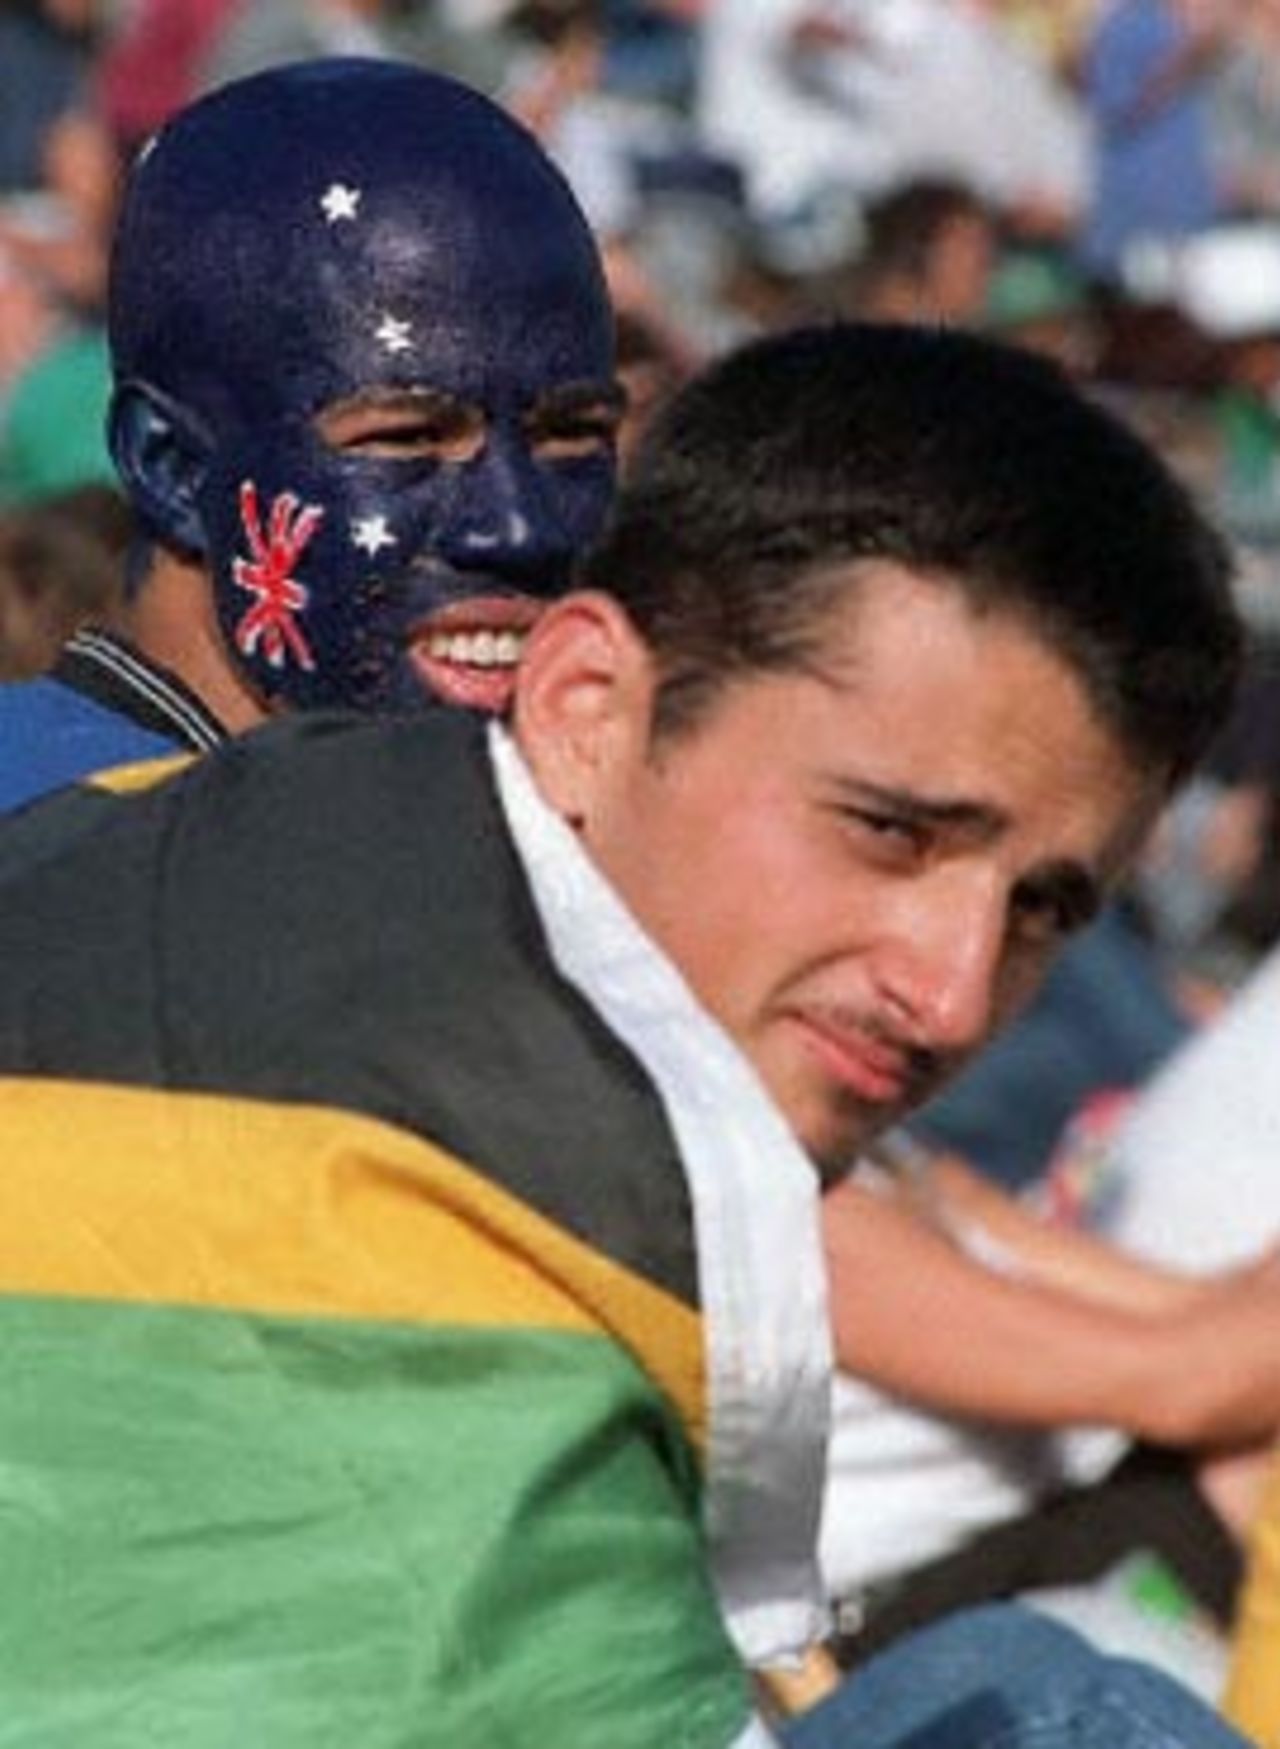 An Australian fan (L) who has his face painted with the Australian flag stands besides a local supporter who draped a South African flag over his body during the limited overs international played at Newlands in Cape Town 14 April 2000. The Australia vs South Africa's match is the second of three one day internationals being played in South Africa